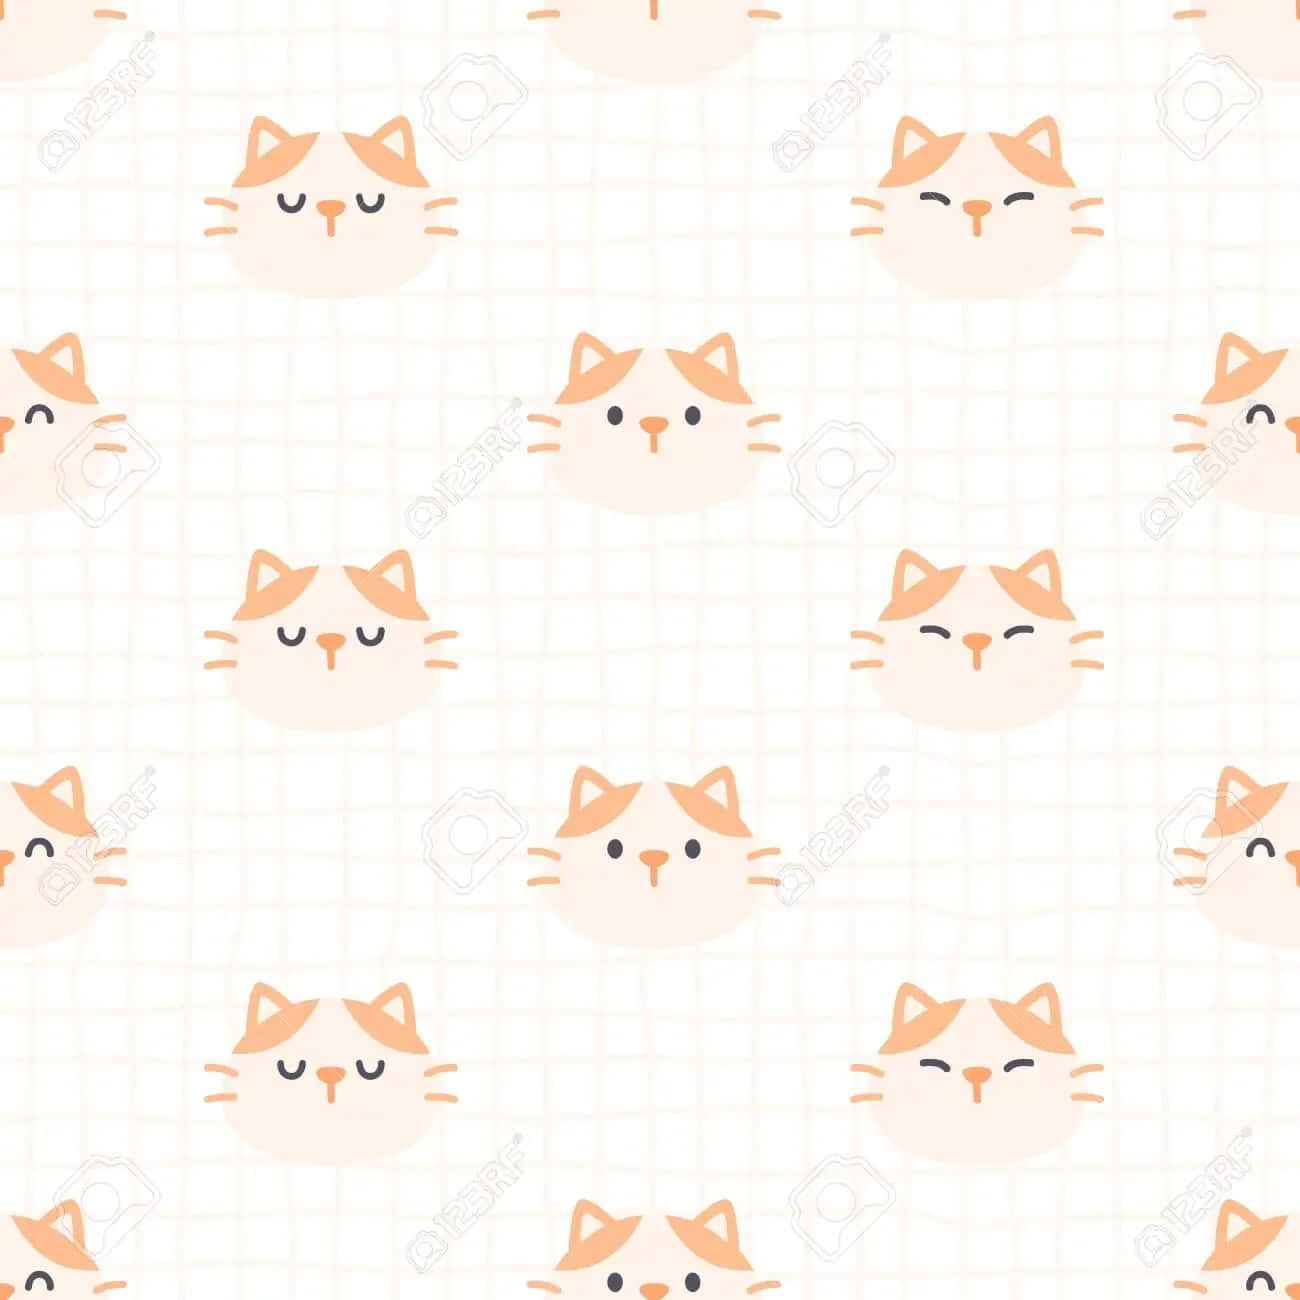 Seamless Pattern With Cute Cat Faces Wallpaper